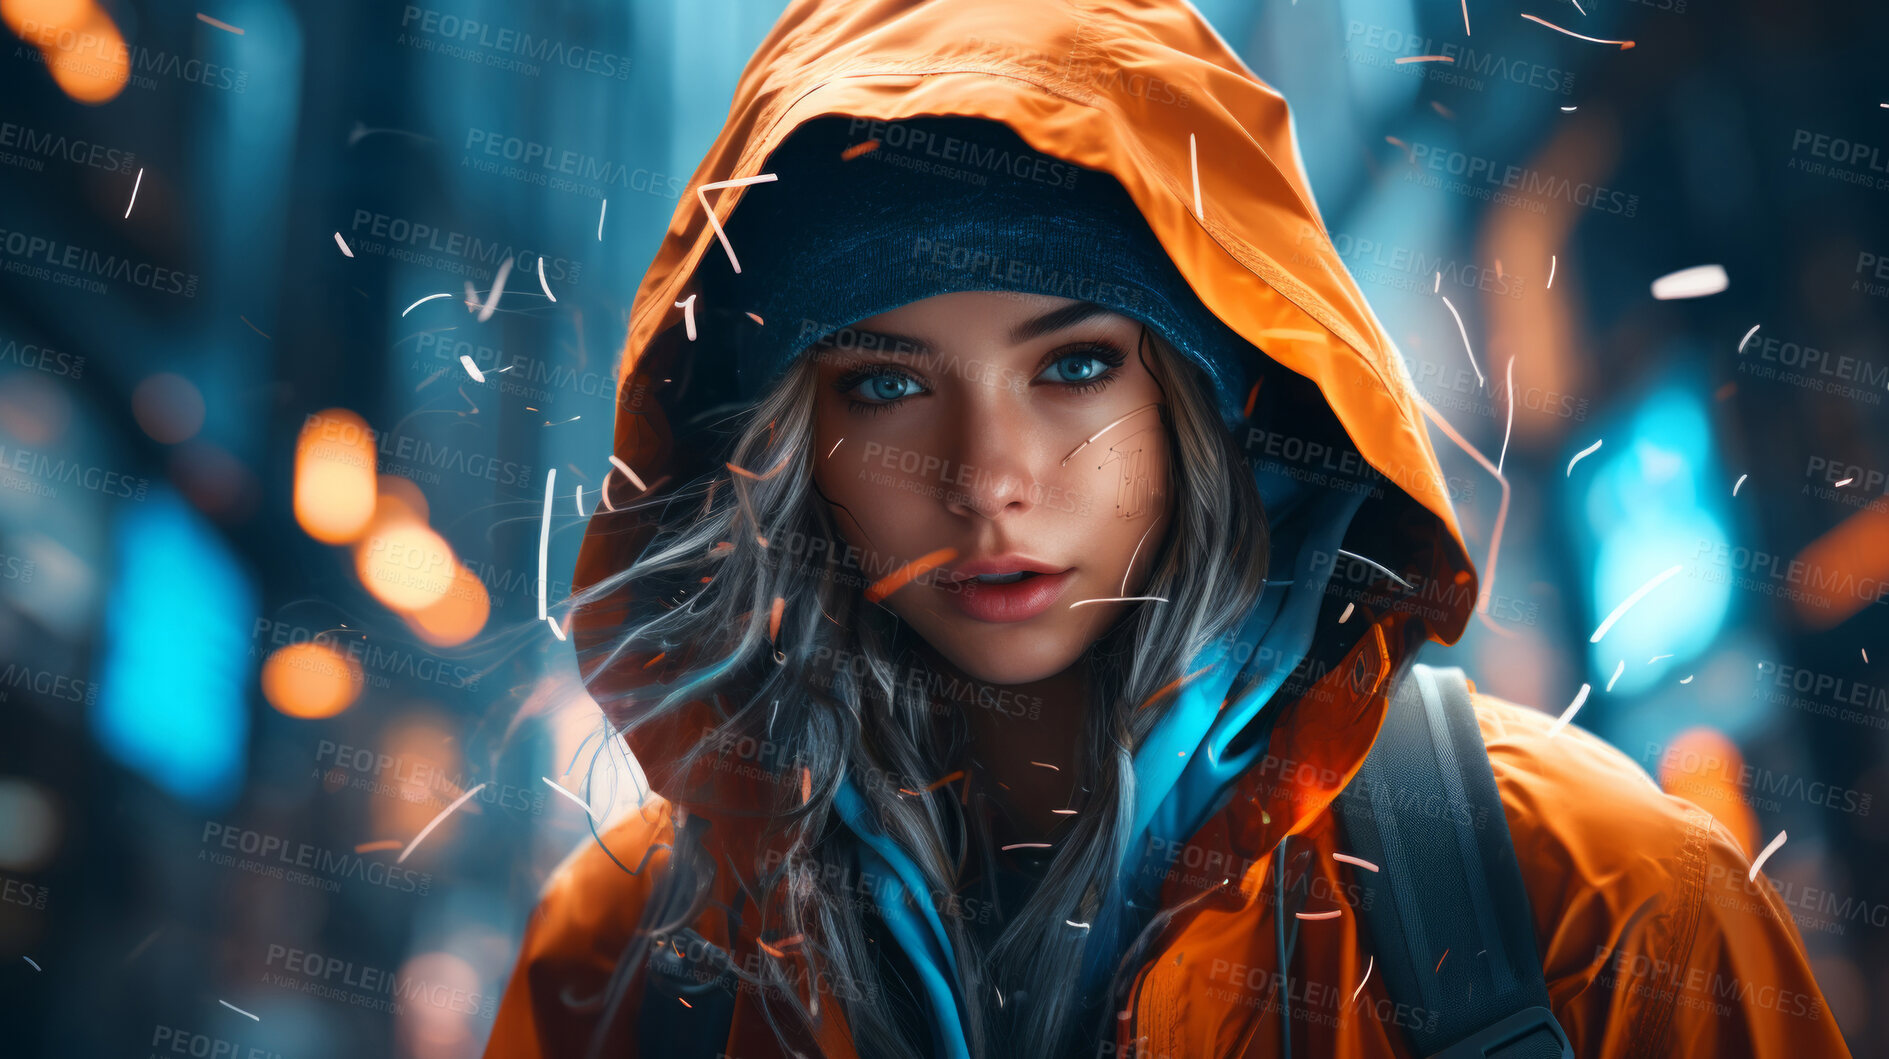 Buy stock photo Futuristic woman, high-tech city, tech-savvy and dynamic. Stylish, urban and forward-thinking design for fashion, art and creative expressions. On a futuristic canvas with a touch of feminine sophistication.